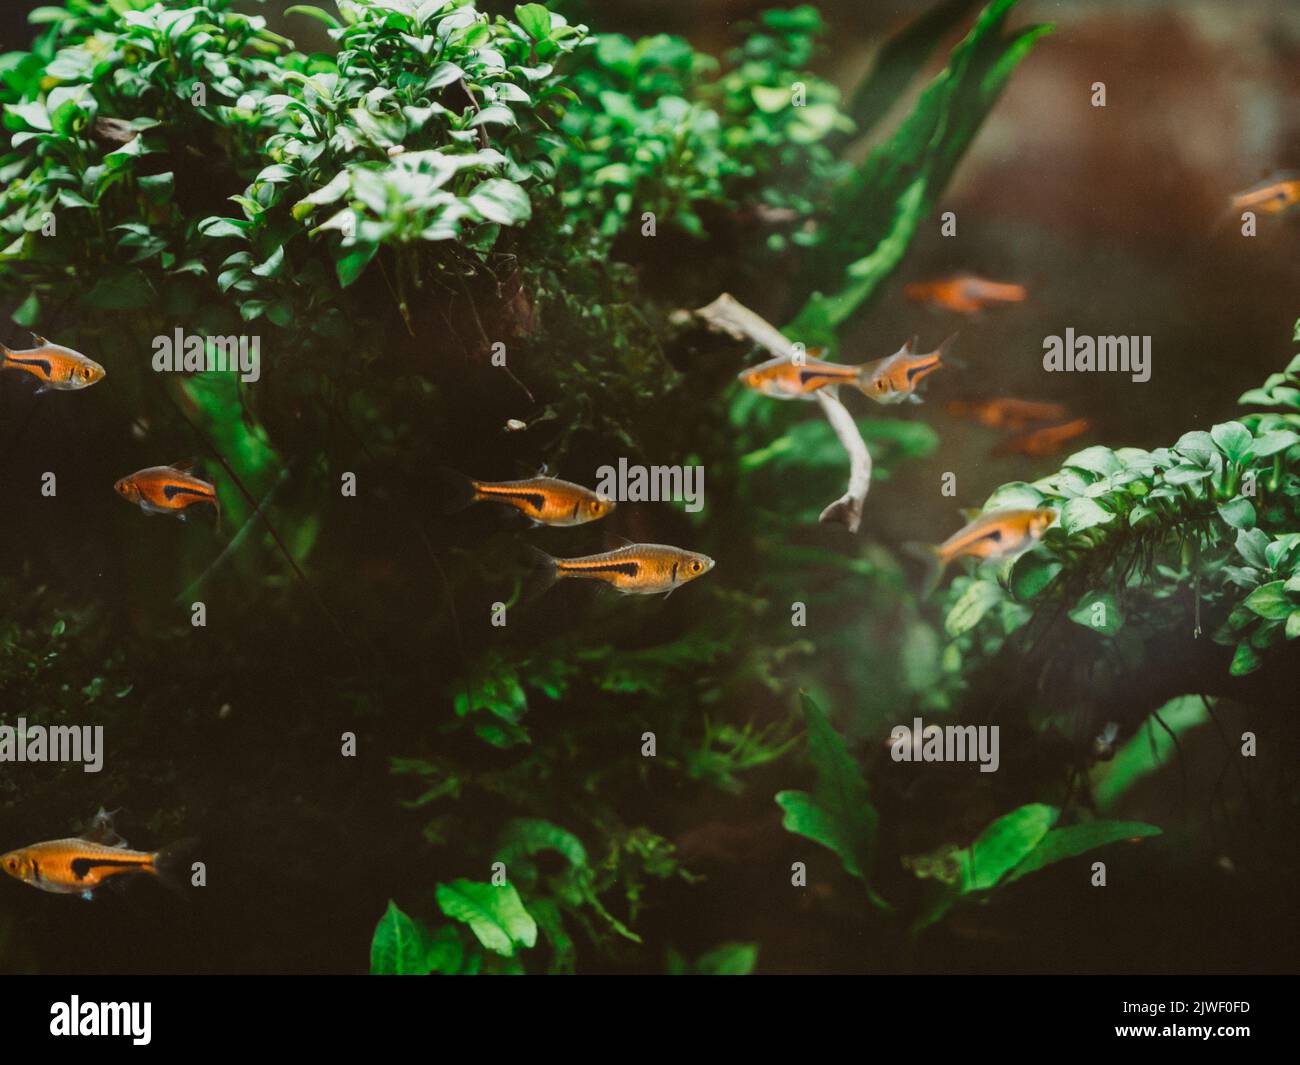 Aquarium with tropical fish and dense greenery view Stock Photo